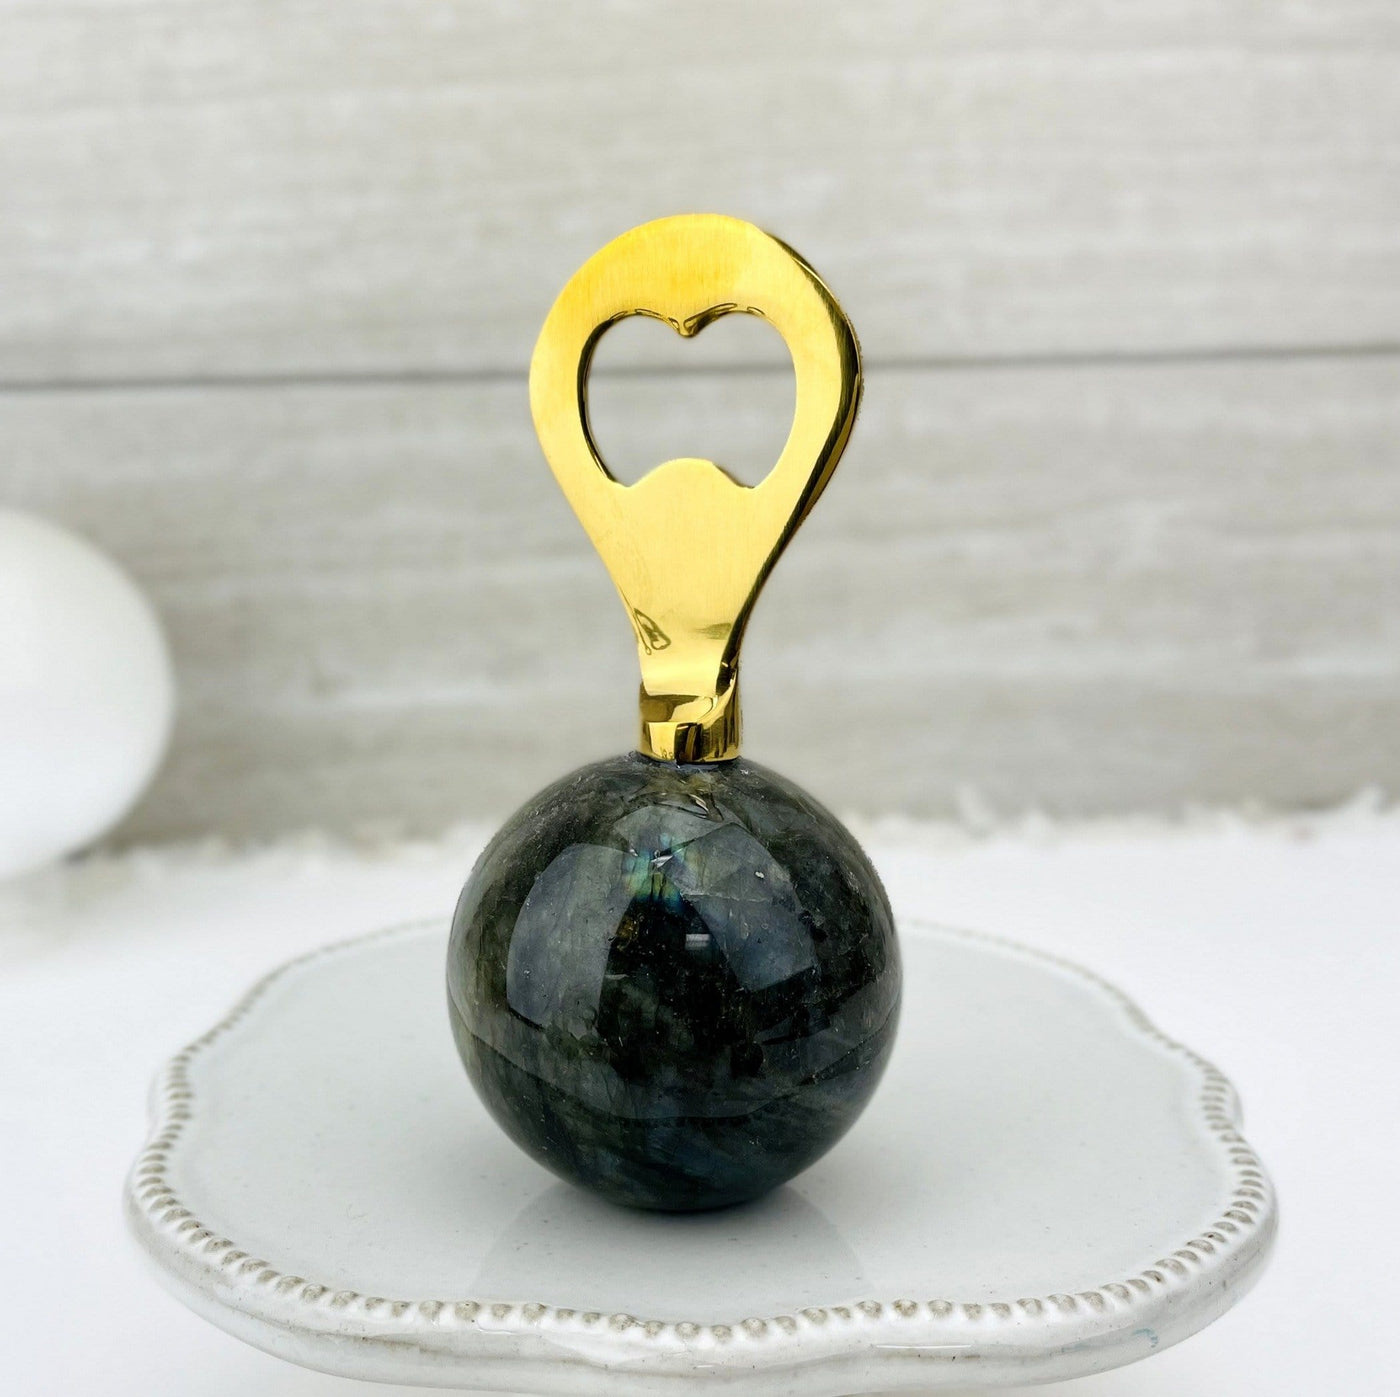 Bottle opener that has a labradorite sphere as the bottom part and a gold opener part.